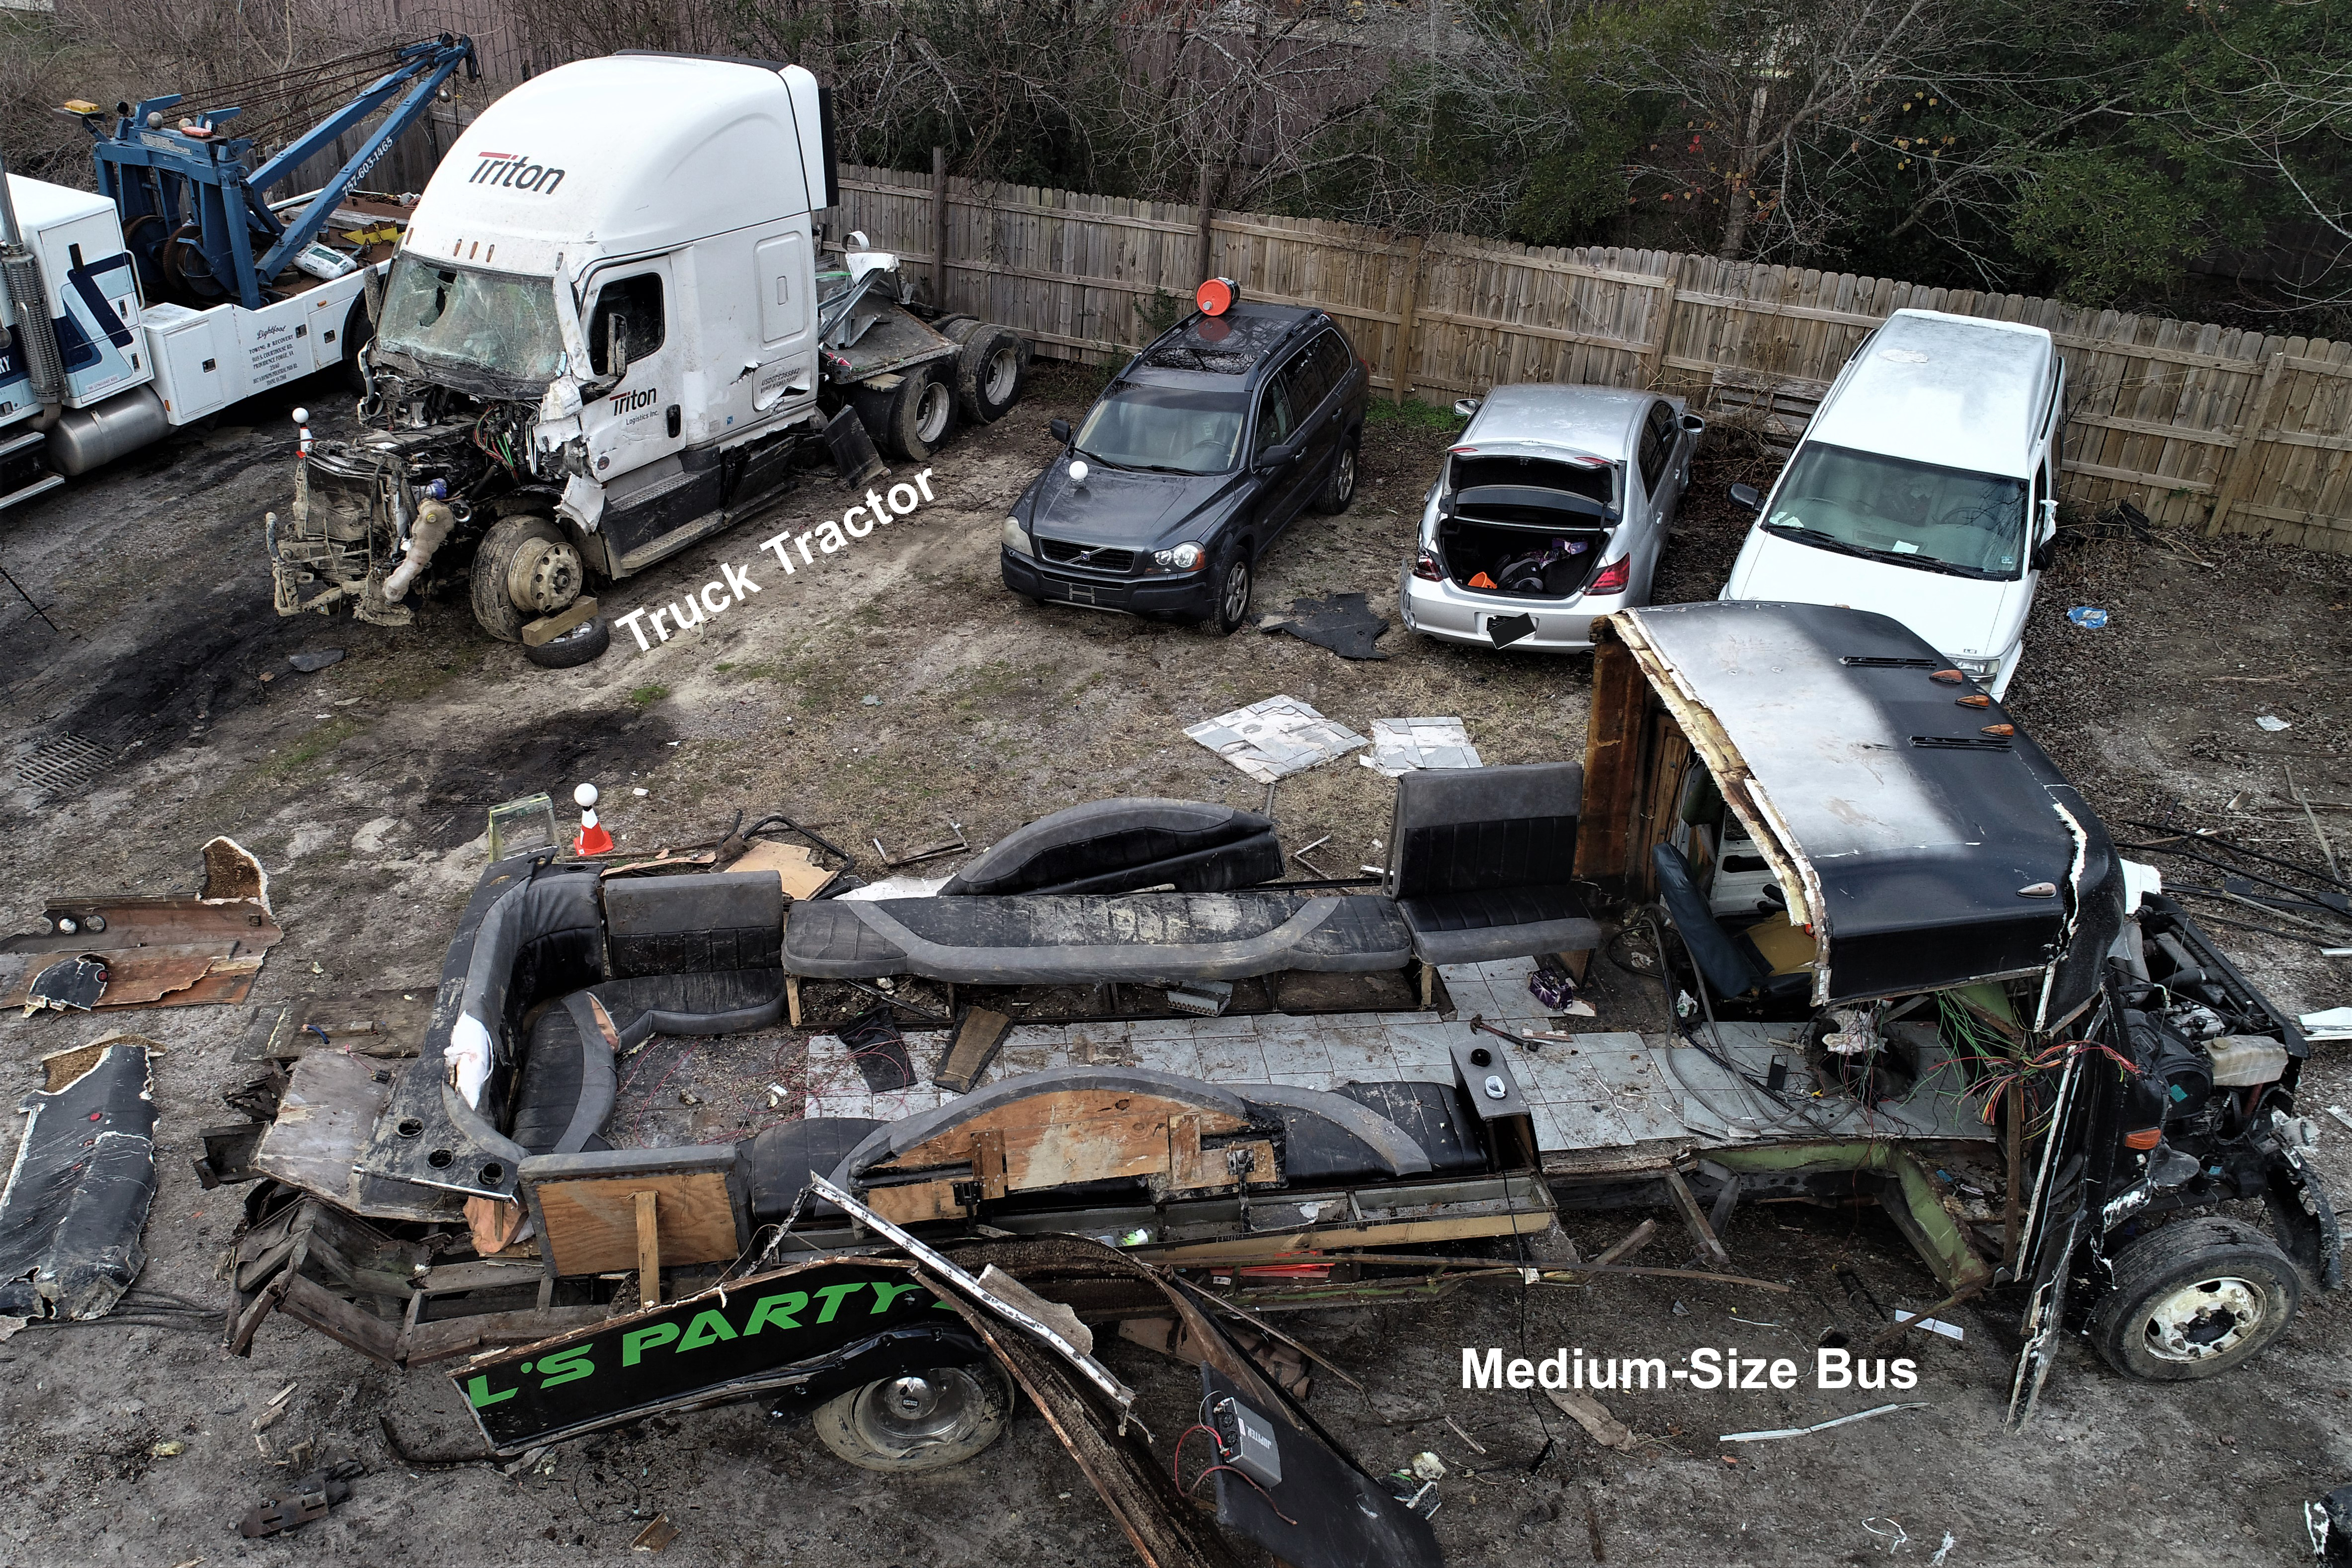 An elevated view showing both vehicles after they had been removed from the crash scene and taken to a tow yard. The medium-size